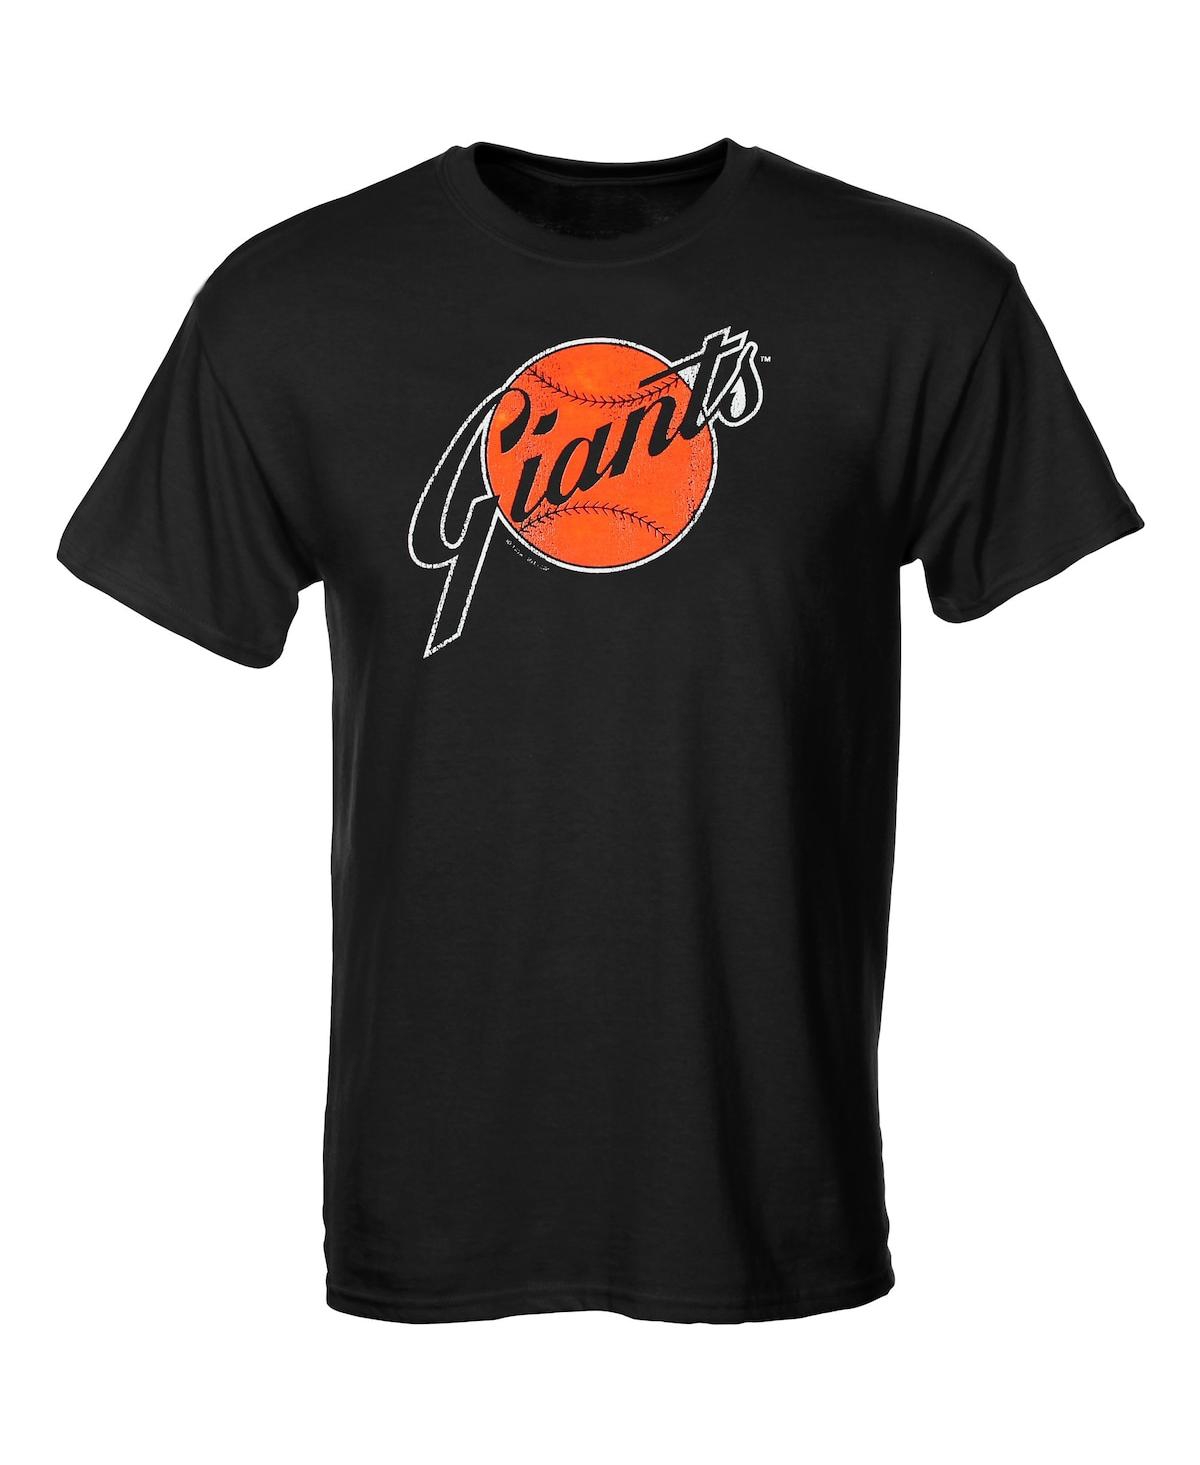 SOFT AS A GRAPE SAN FRANCISCO GIANTS BIG BOYS AND GIRLS COOPERSTOWN T-SHIRT